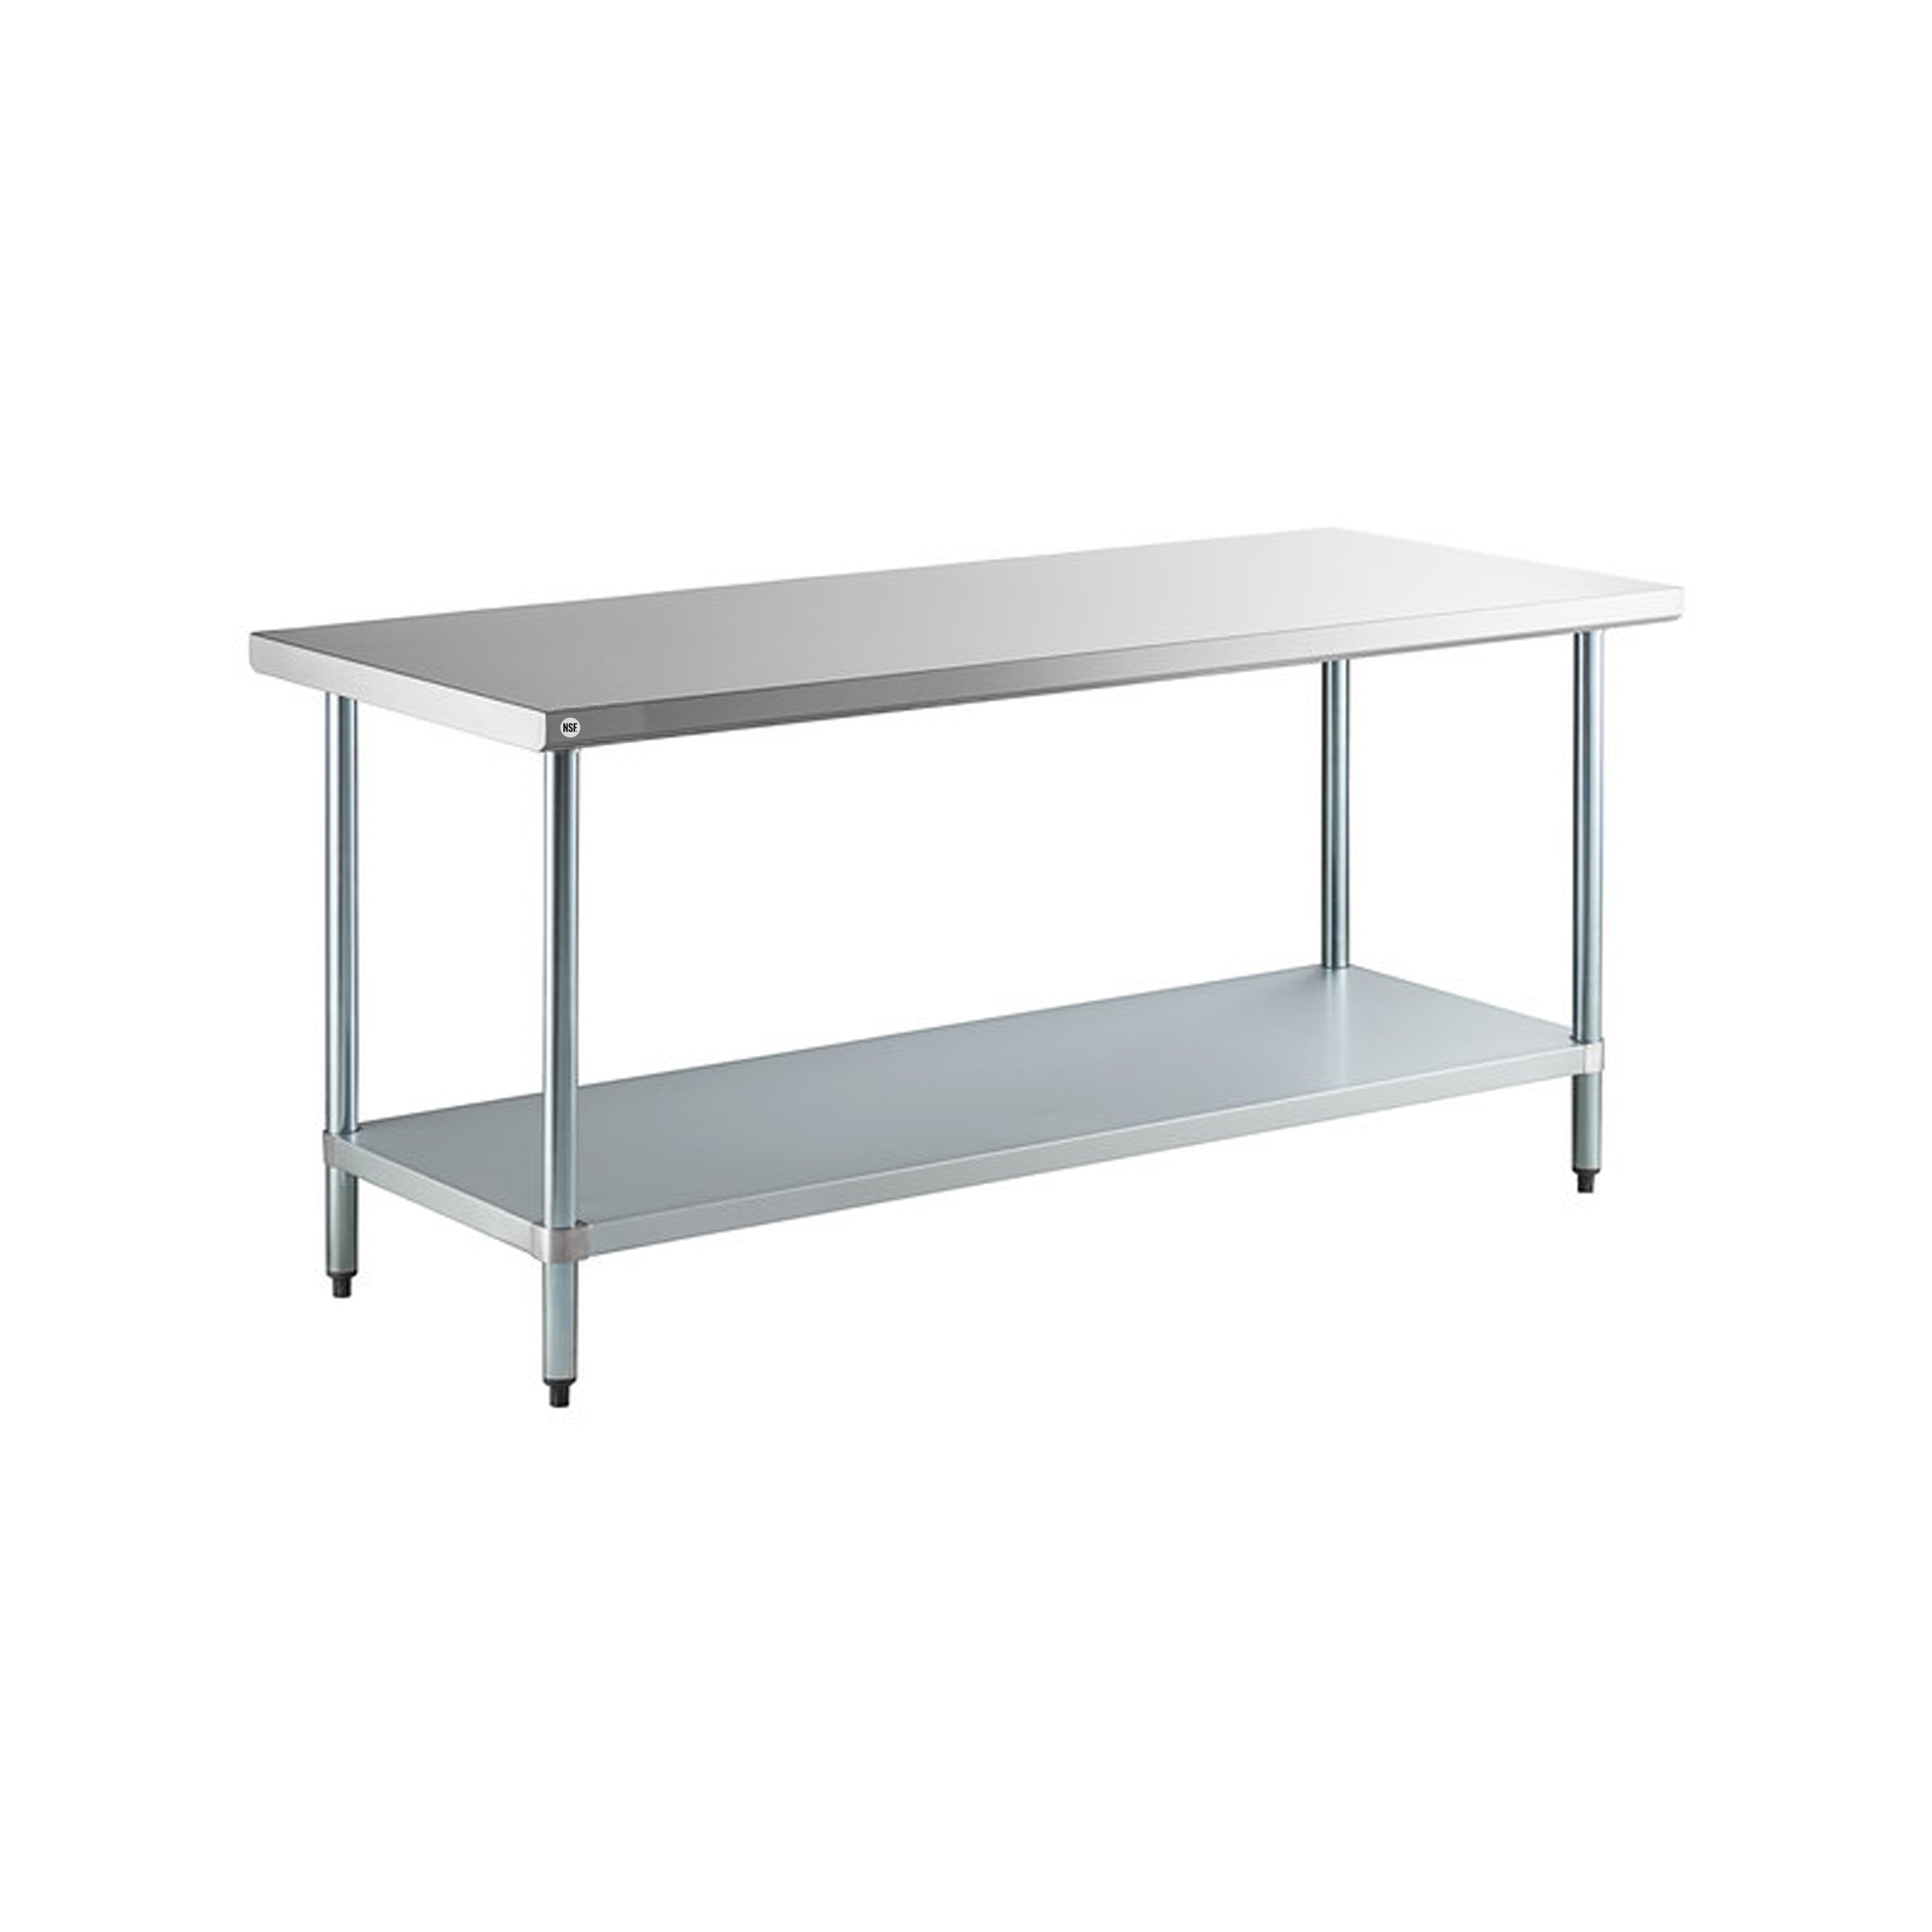 Omcan - 17582, Commercial 72" x 24" Stainless Steel Kitchen Work Table 1200lbs Medium Duty